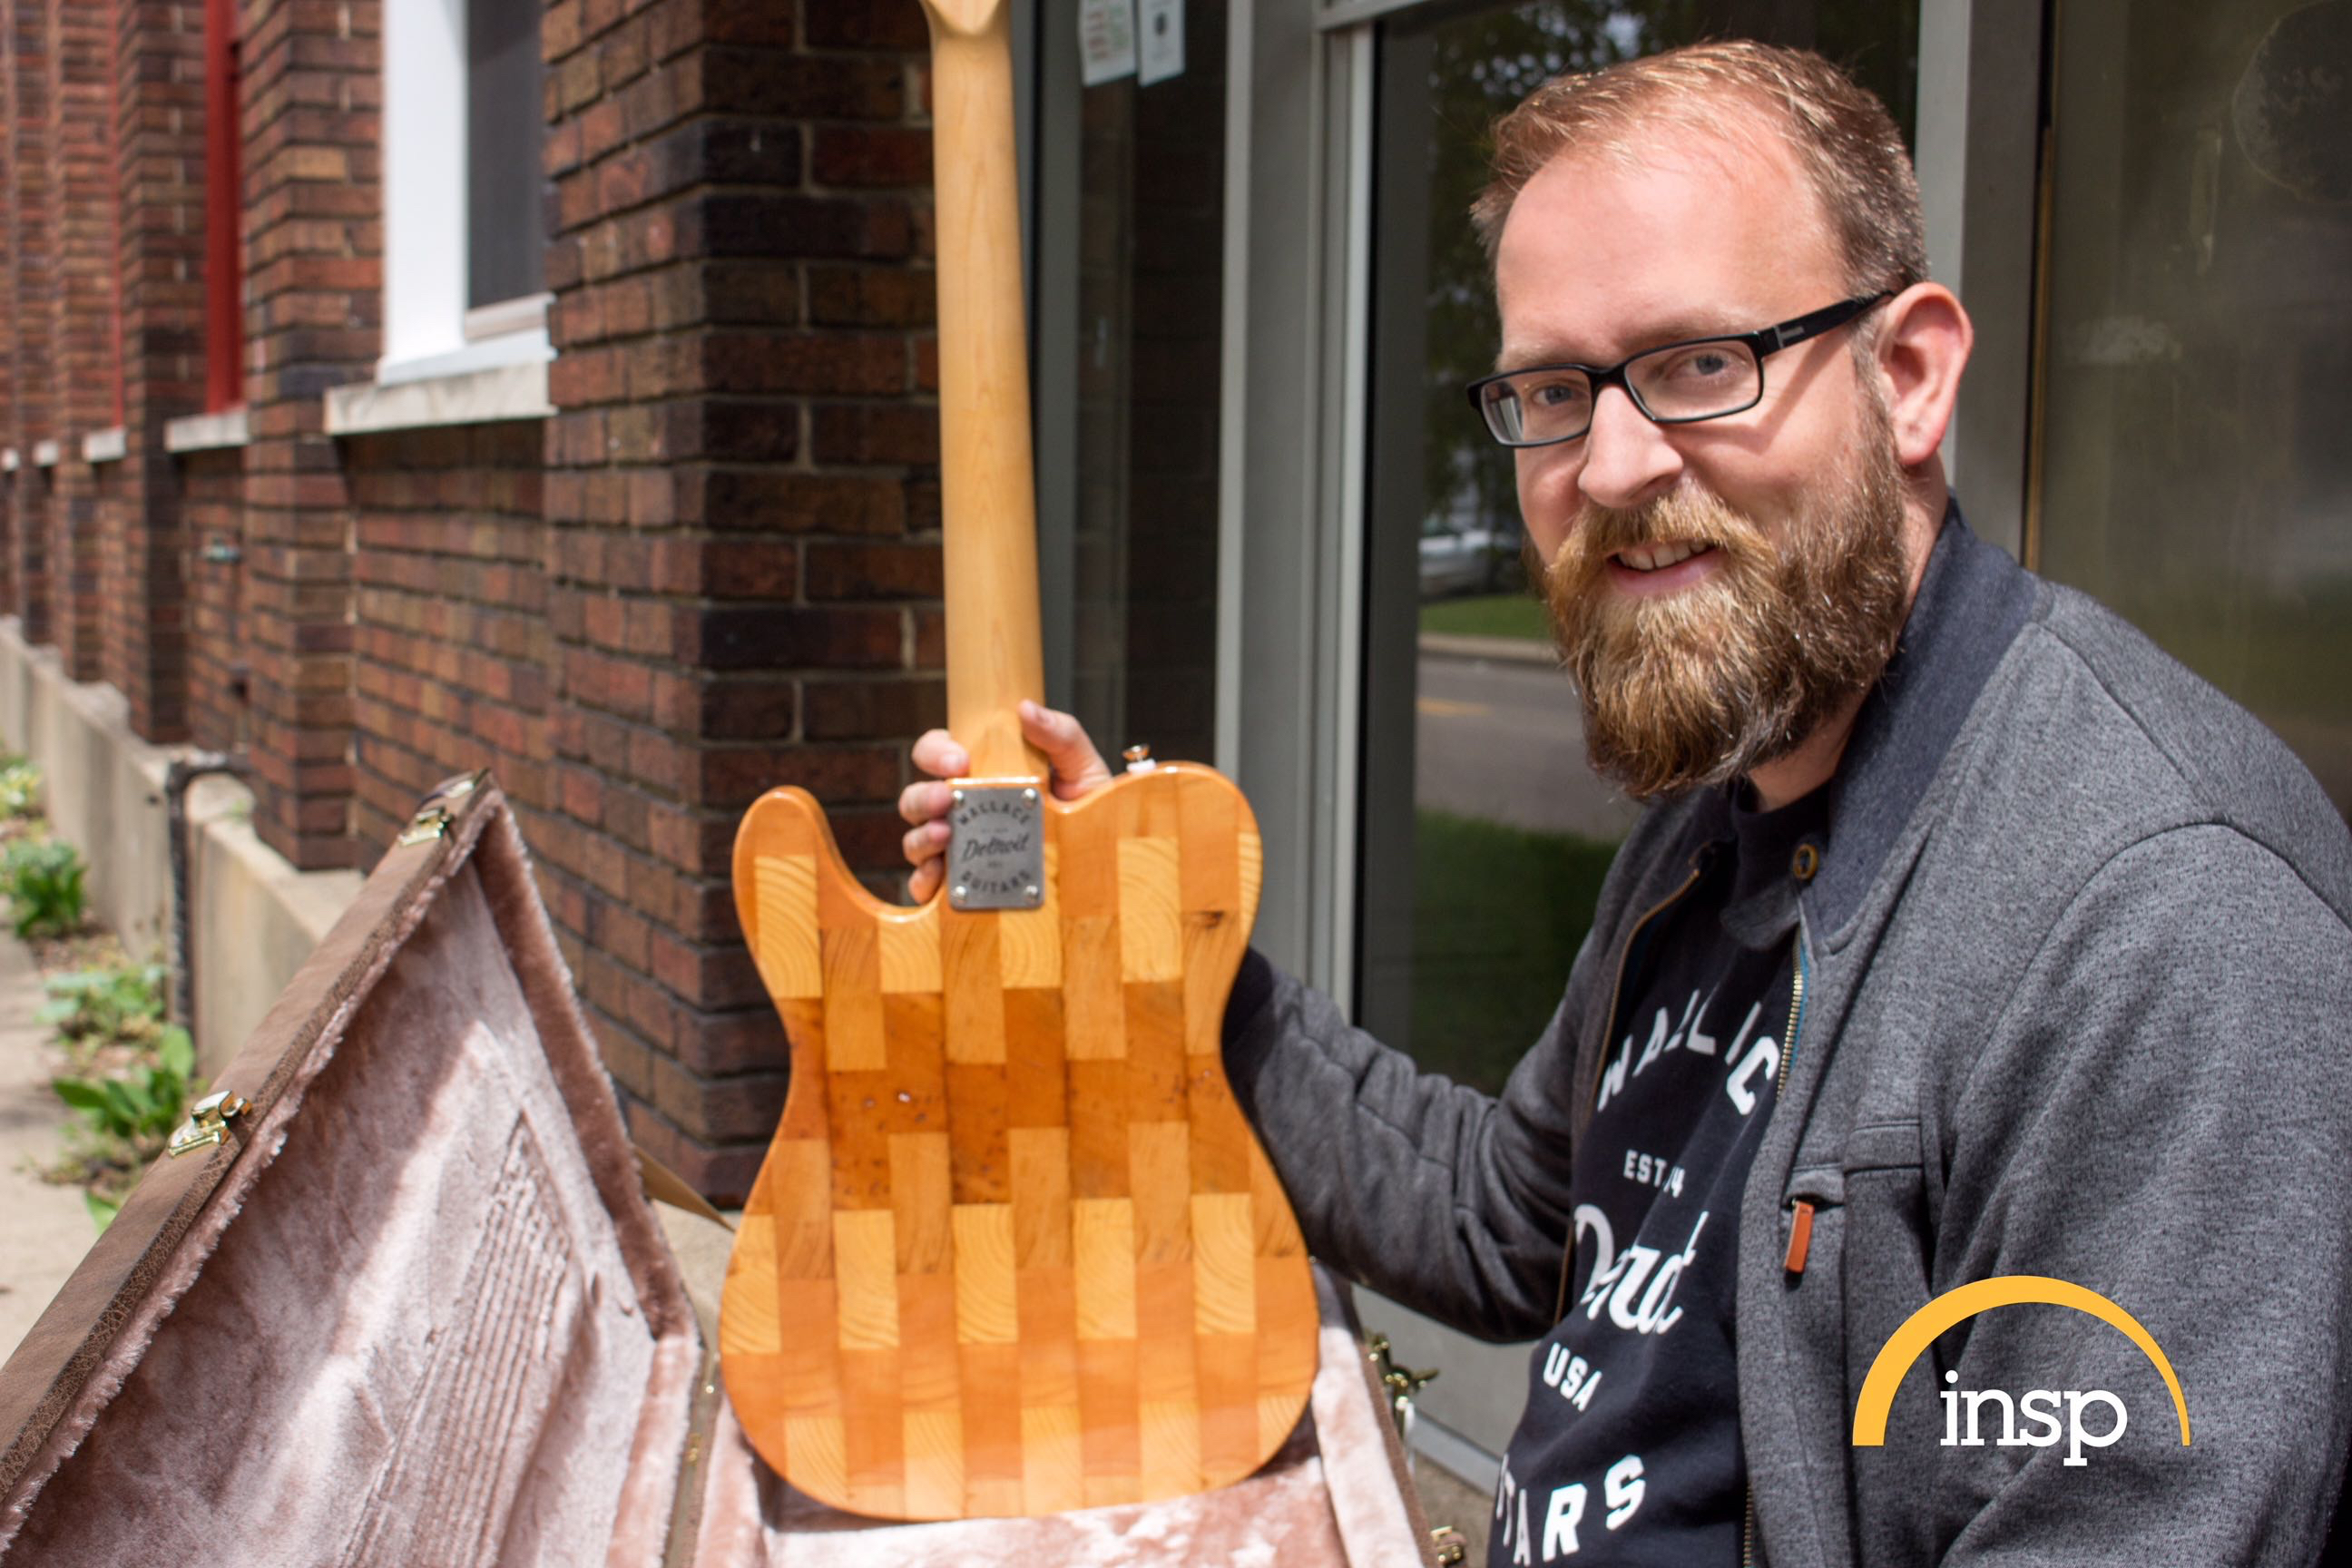 The Sound of the City: Wallace Detroit Guitars Founder to be